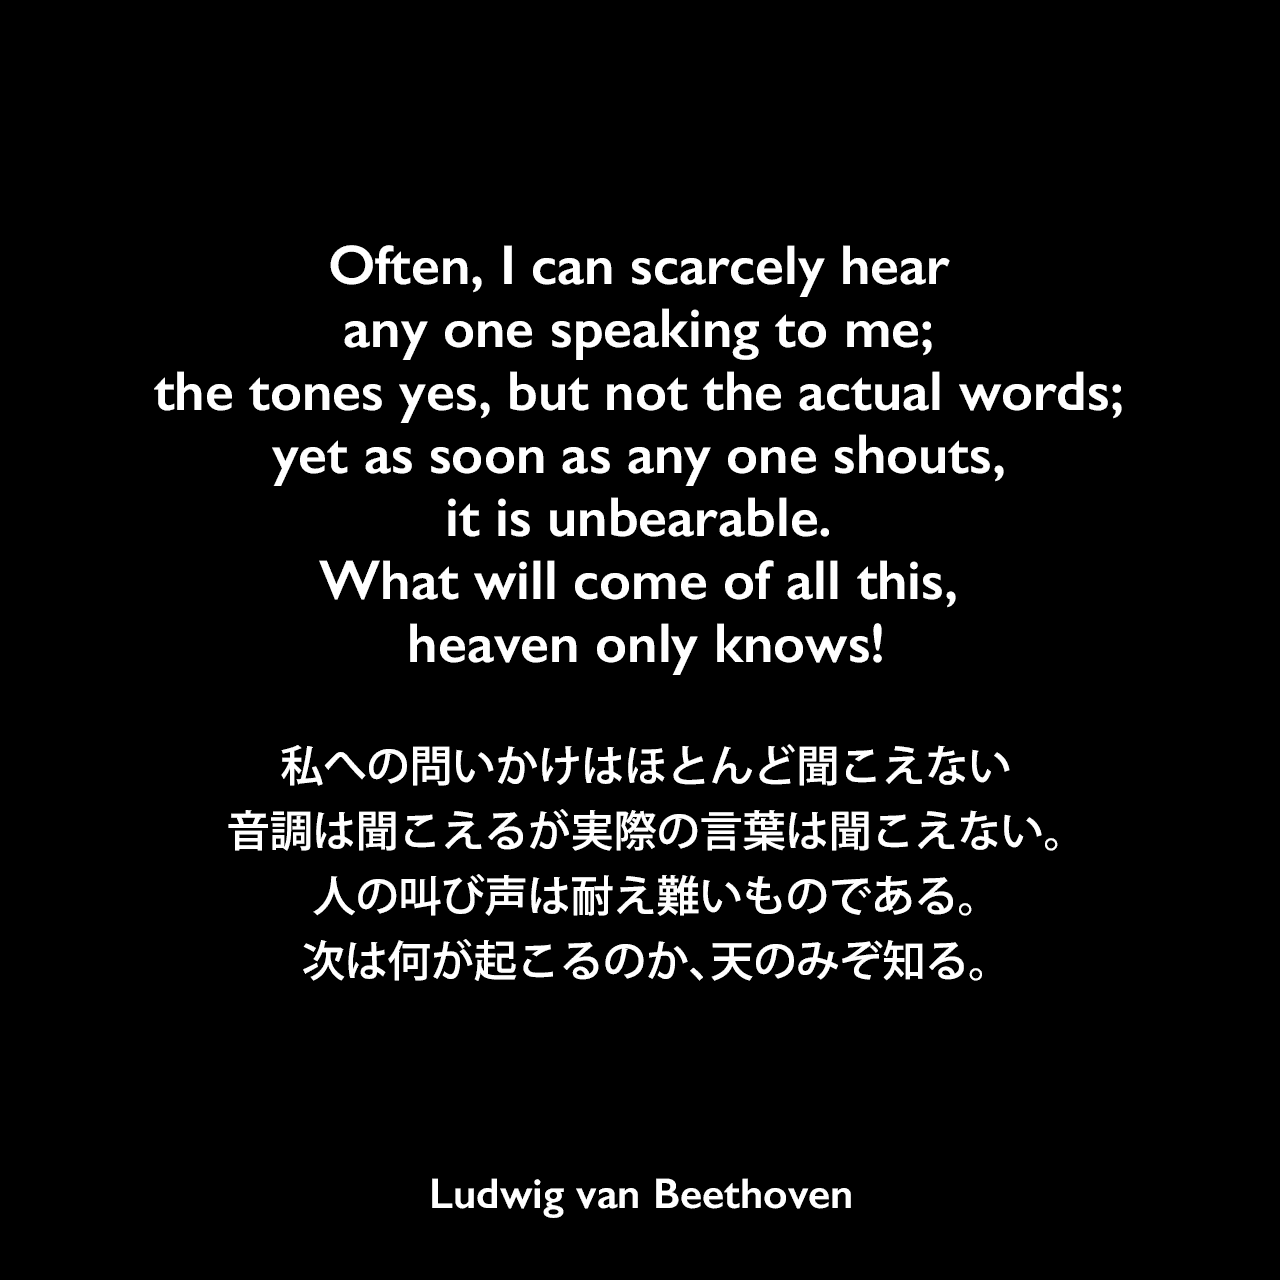 Often, I can scarcely hear any one speaking to me; the tones yes, but not the actual words; yet as soon as any one shouts, it is unbearable. What will come of all this, heaven only knows!私への問いかけはほとんど聞こえない、音調は聞こえるが実際の言葉は聞こえない。人の叫び声は耐え難いものである。次は何が起こるのか、天のみぞ知る。Ludwig van Beethoven